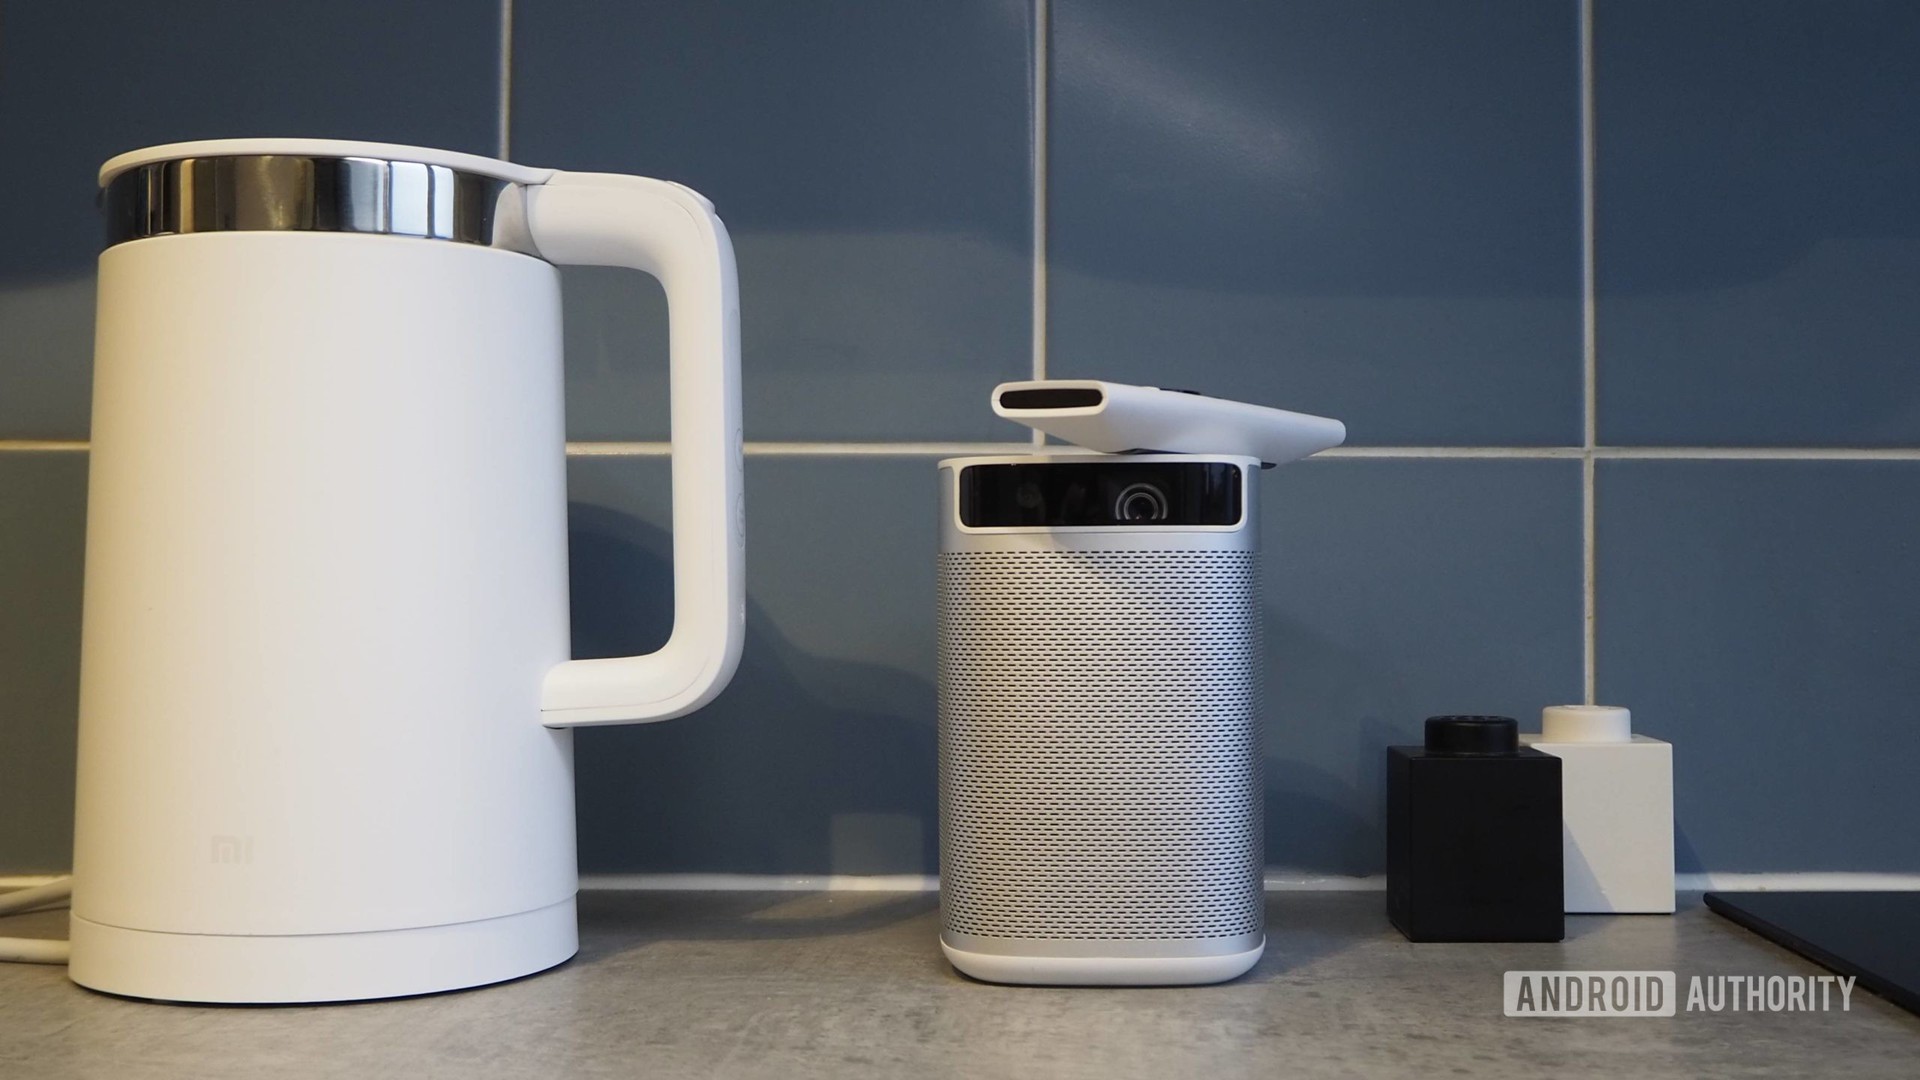 Xgimi Mogo Pro Android TV projector on kitchen counter next to Xiaomi smart kettle